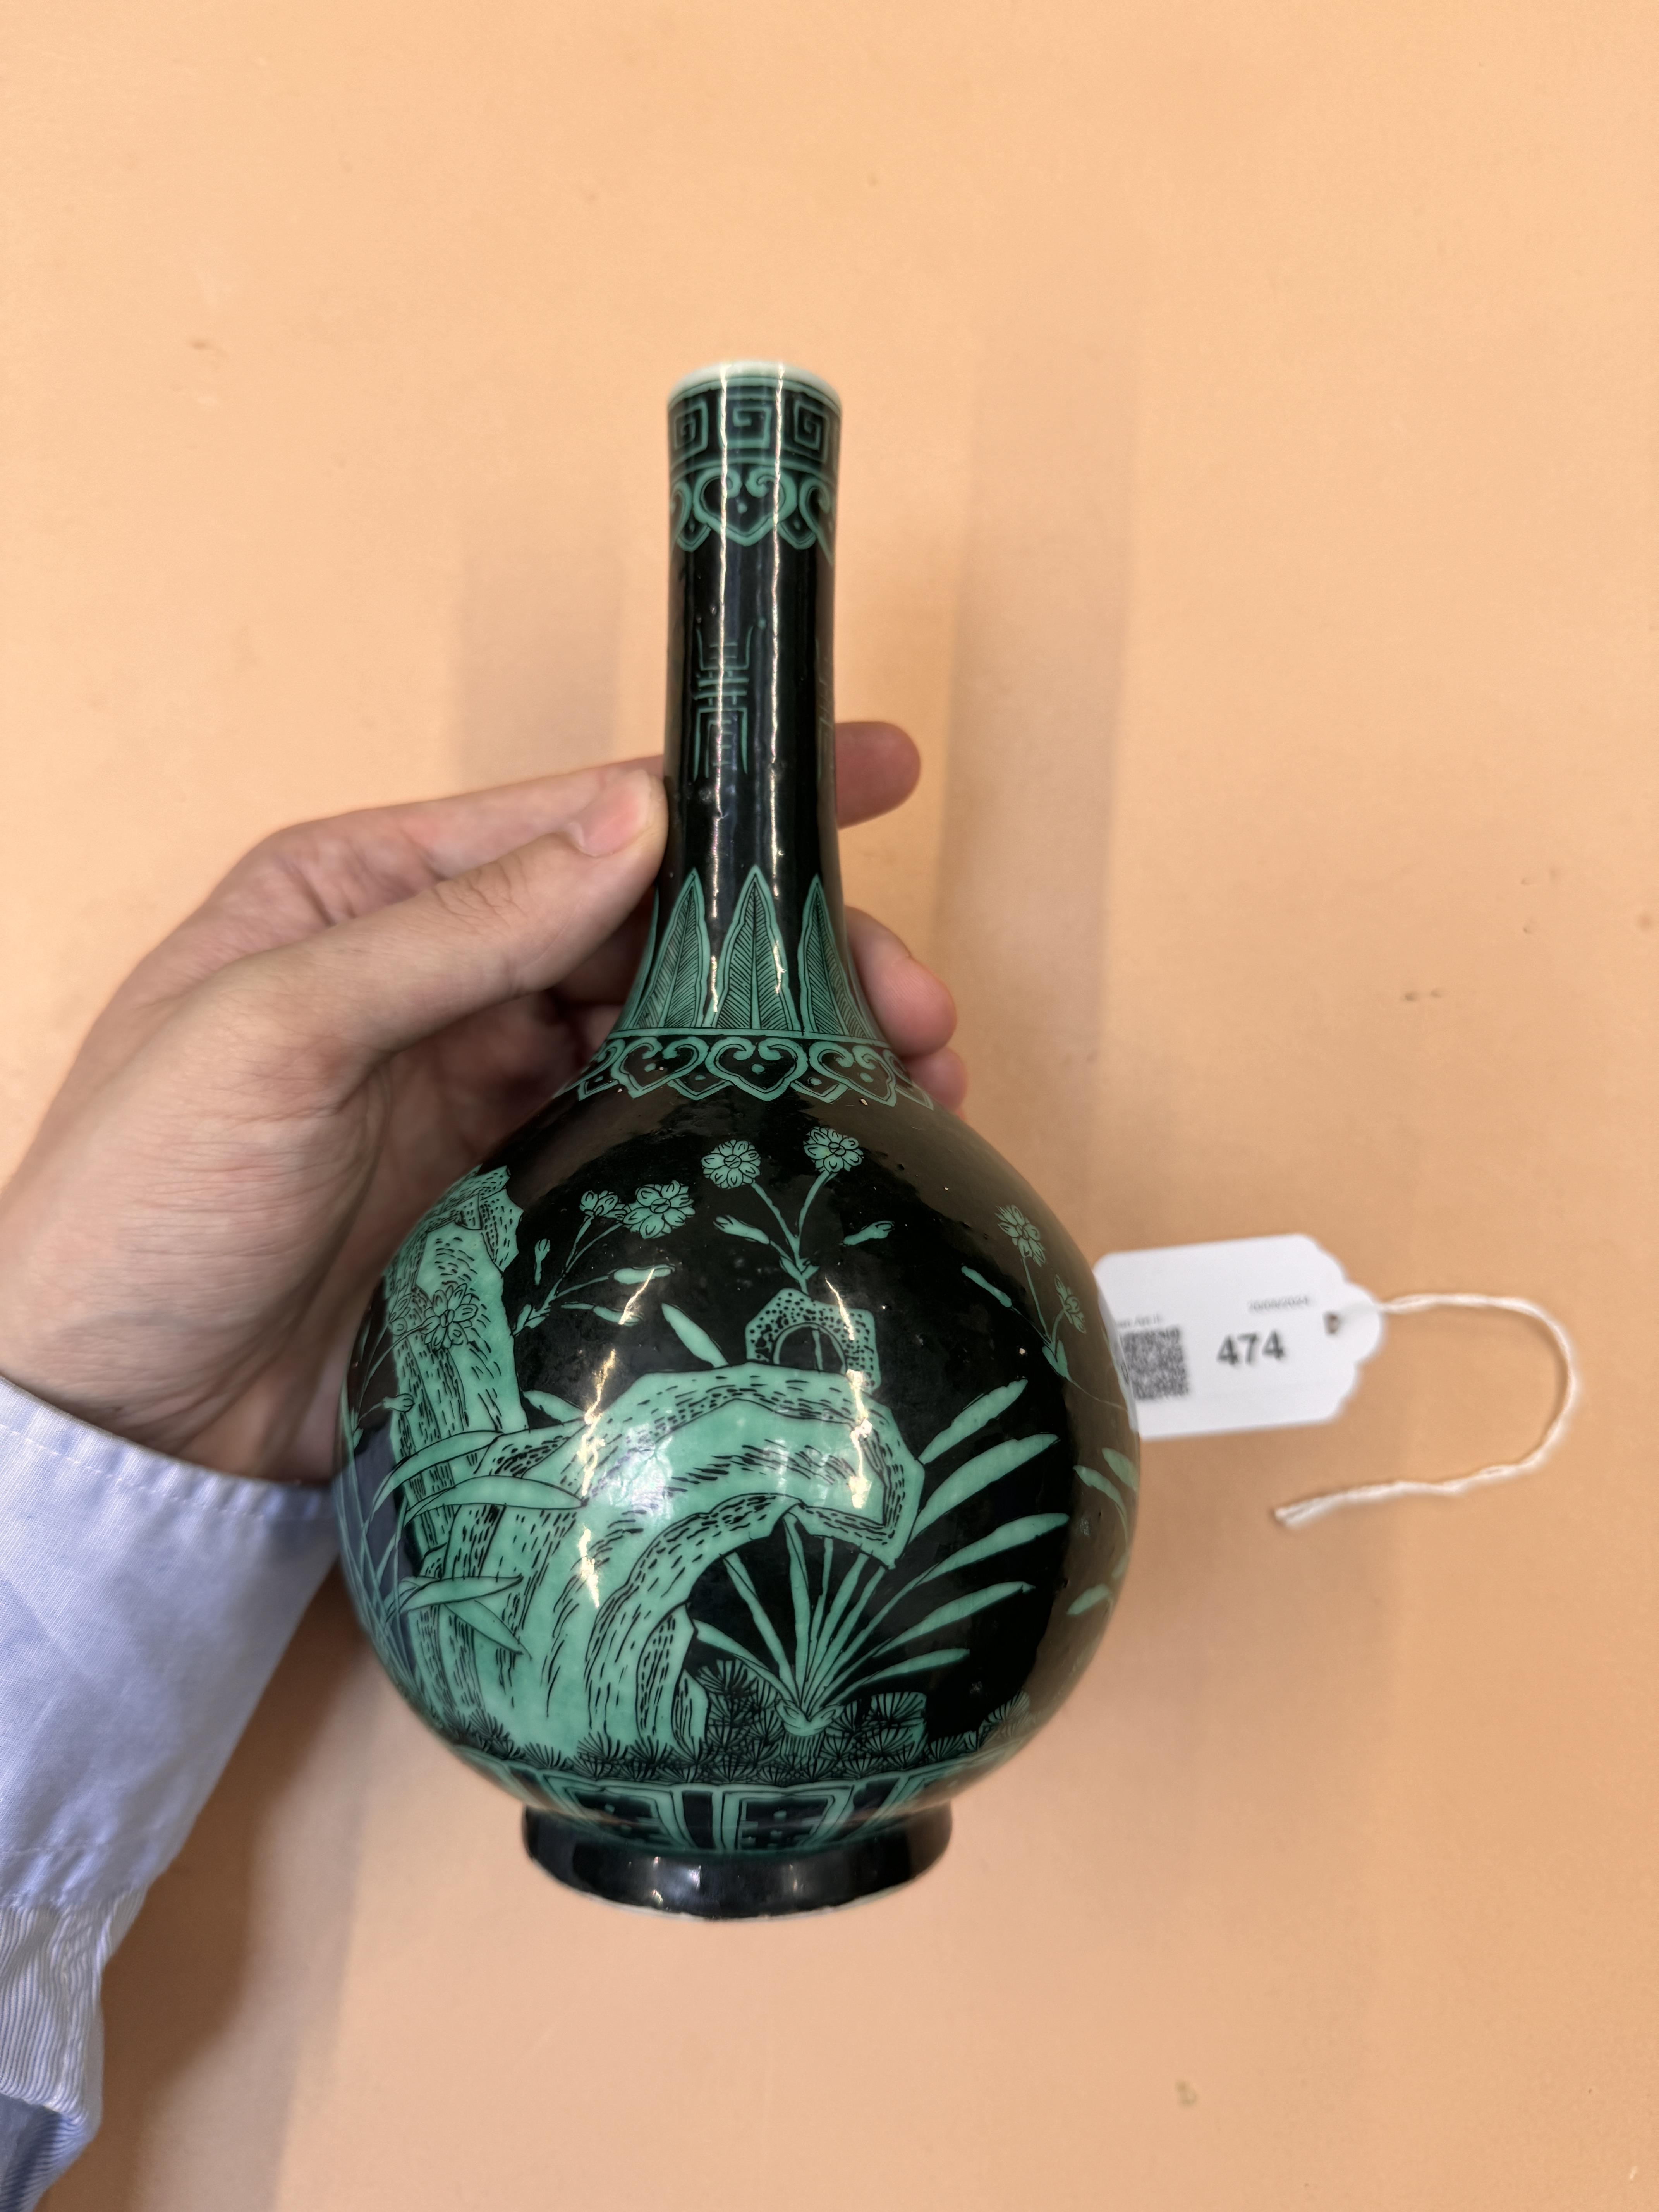 A CHINESE FAMILLE-NOIRE 'BLOSSOMS' VASE 二十世紀 墨地粉彩花卉紋瓶 - Image 12 of 12